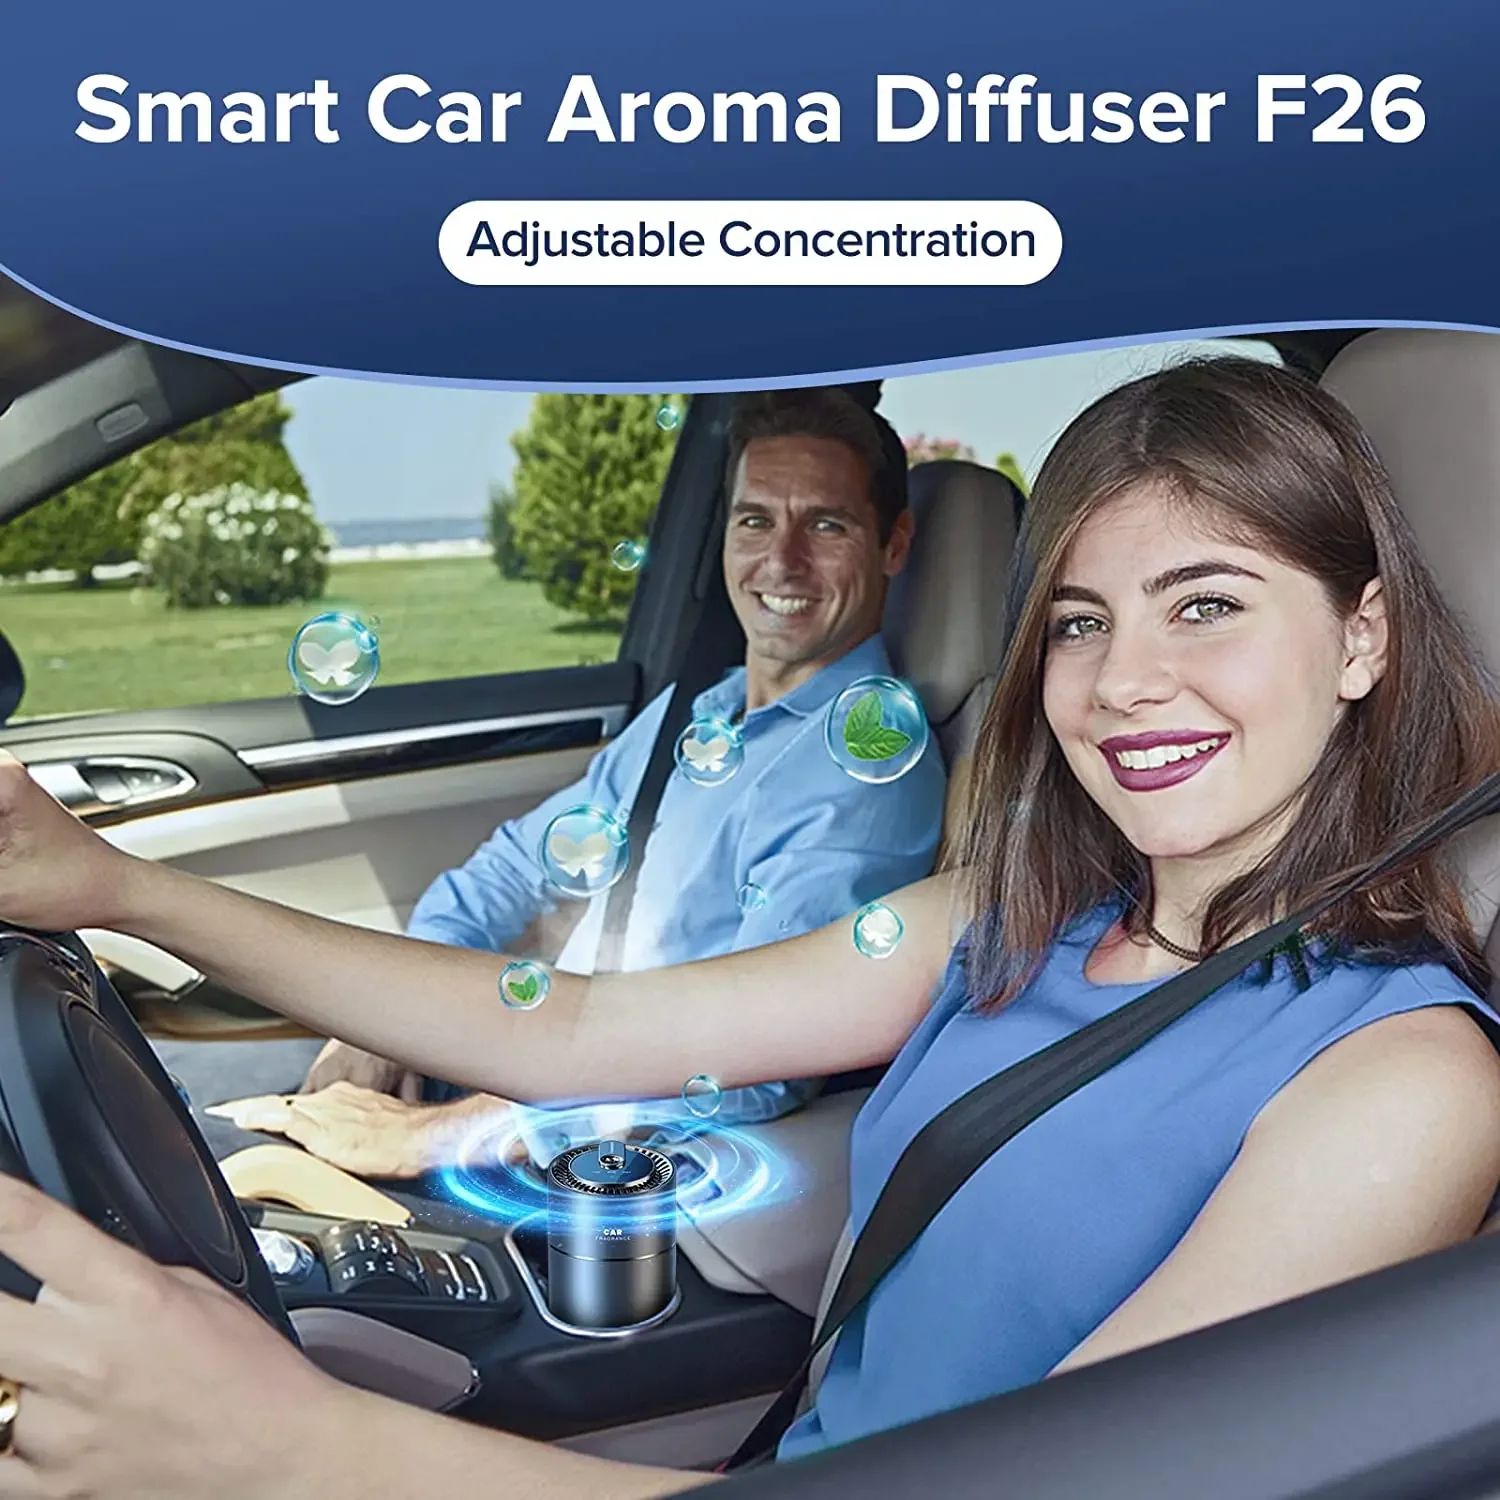 Smart Car Air Fresheners, Auto ON/OFF, Adjustable Concentration